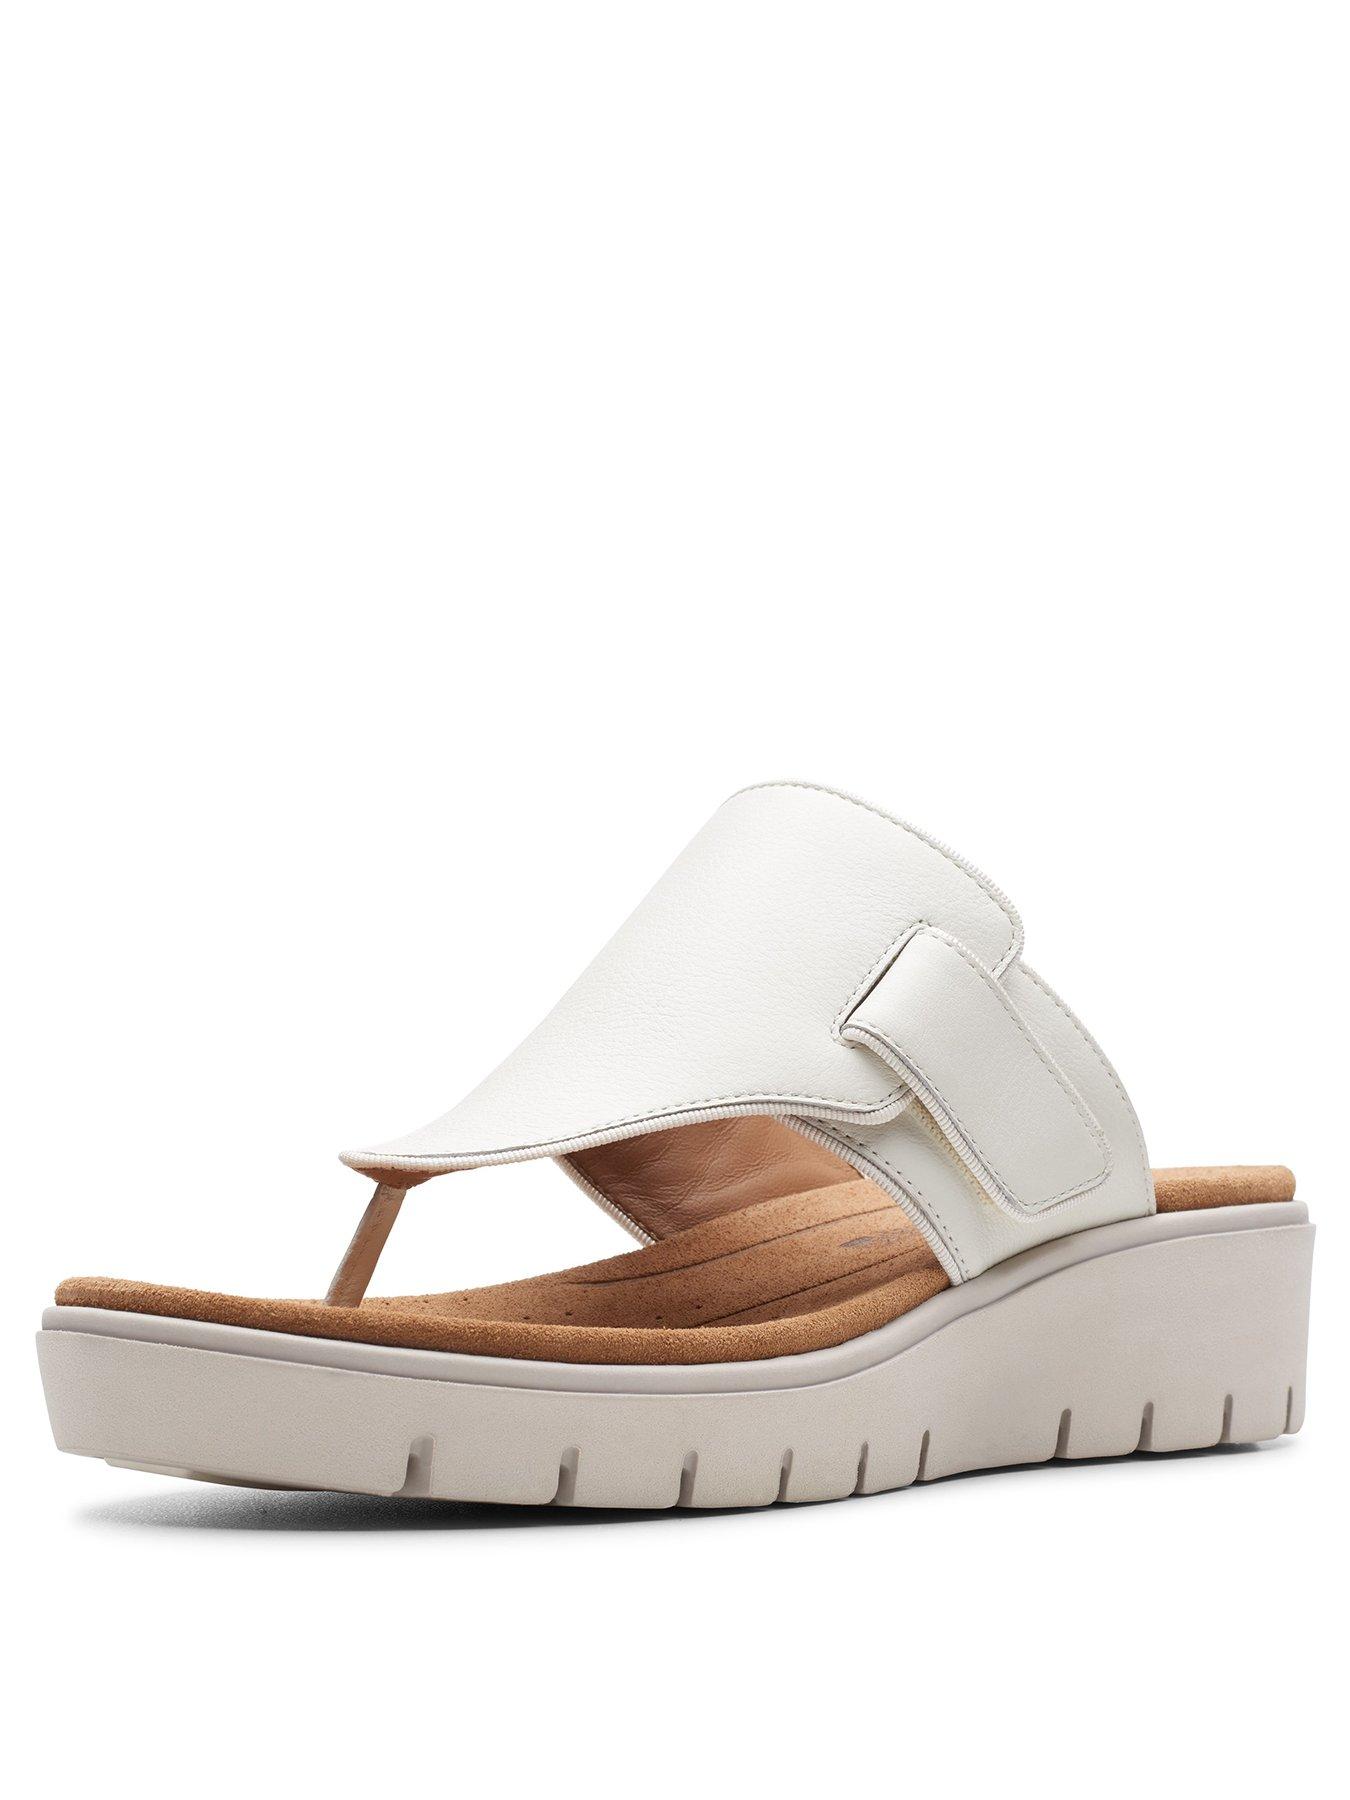 clarks wide fit wedge sandals